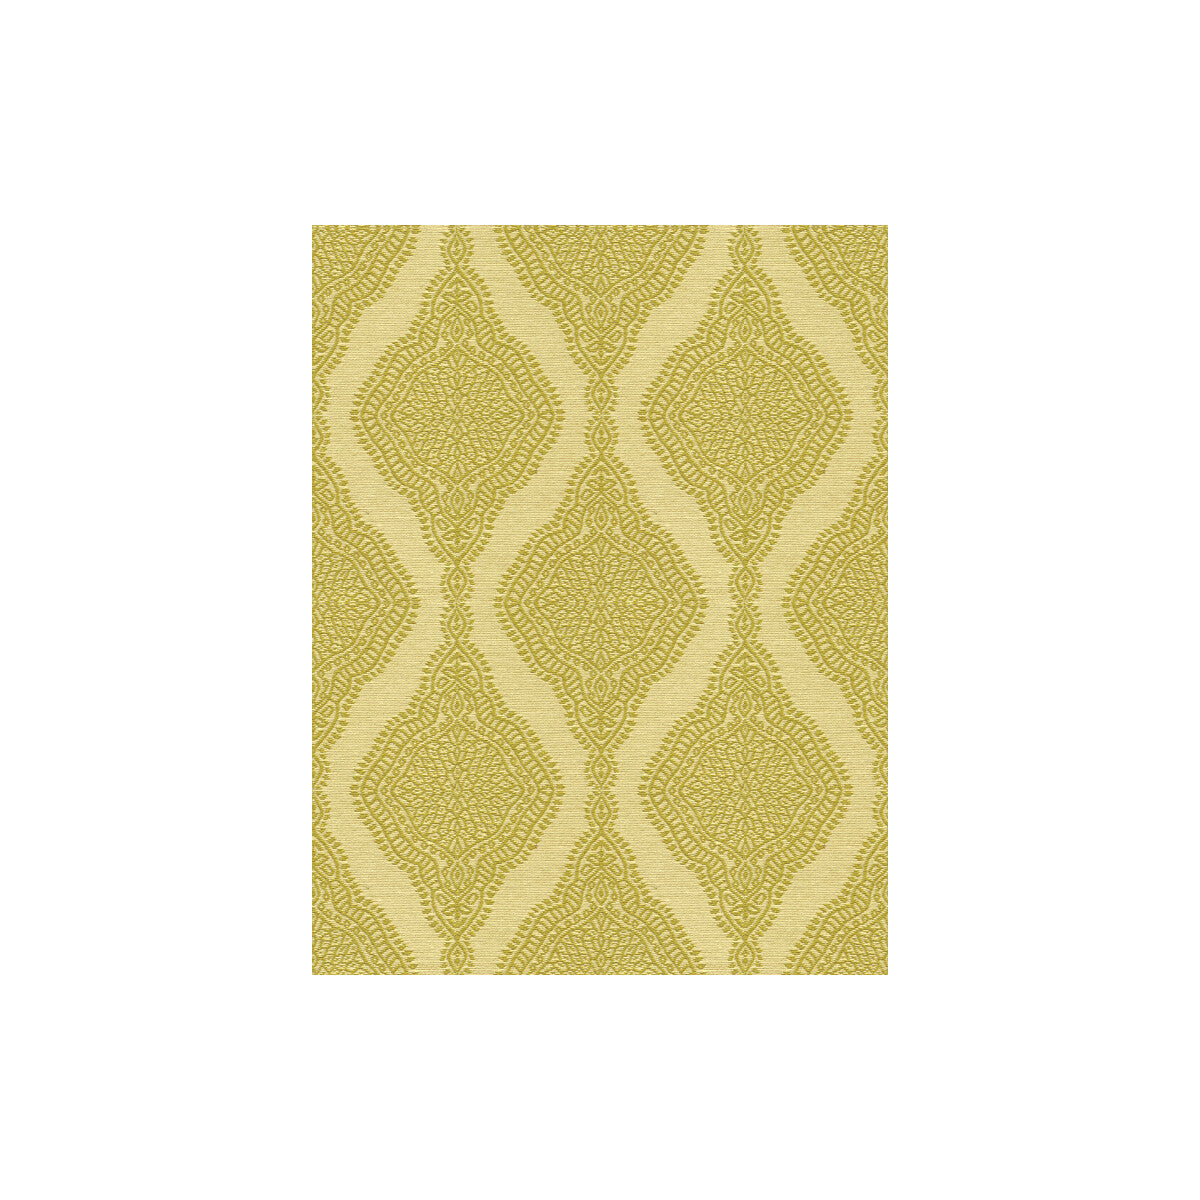 Liliana fabric in pear color - pattern 32935.3.0 - by Kravet Contract in the Contract Gis collection